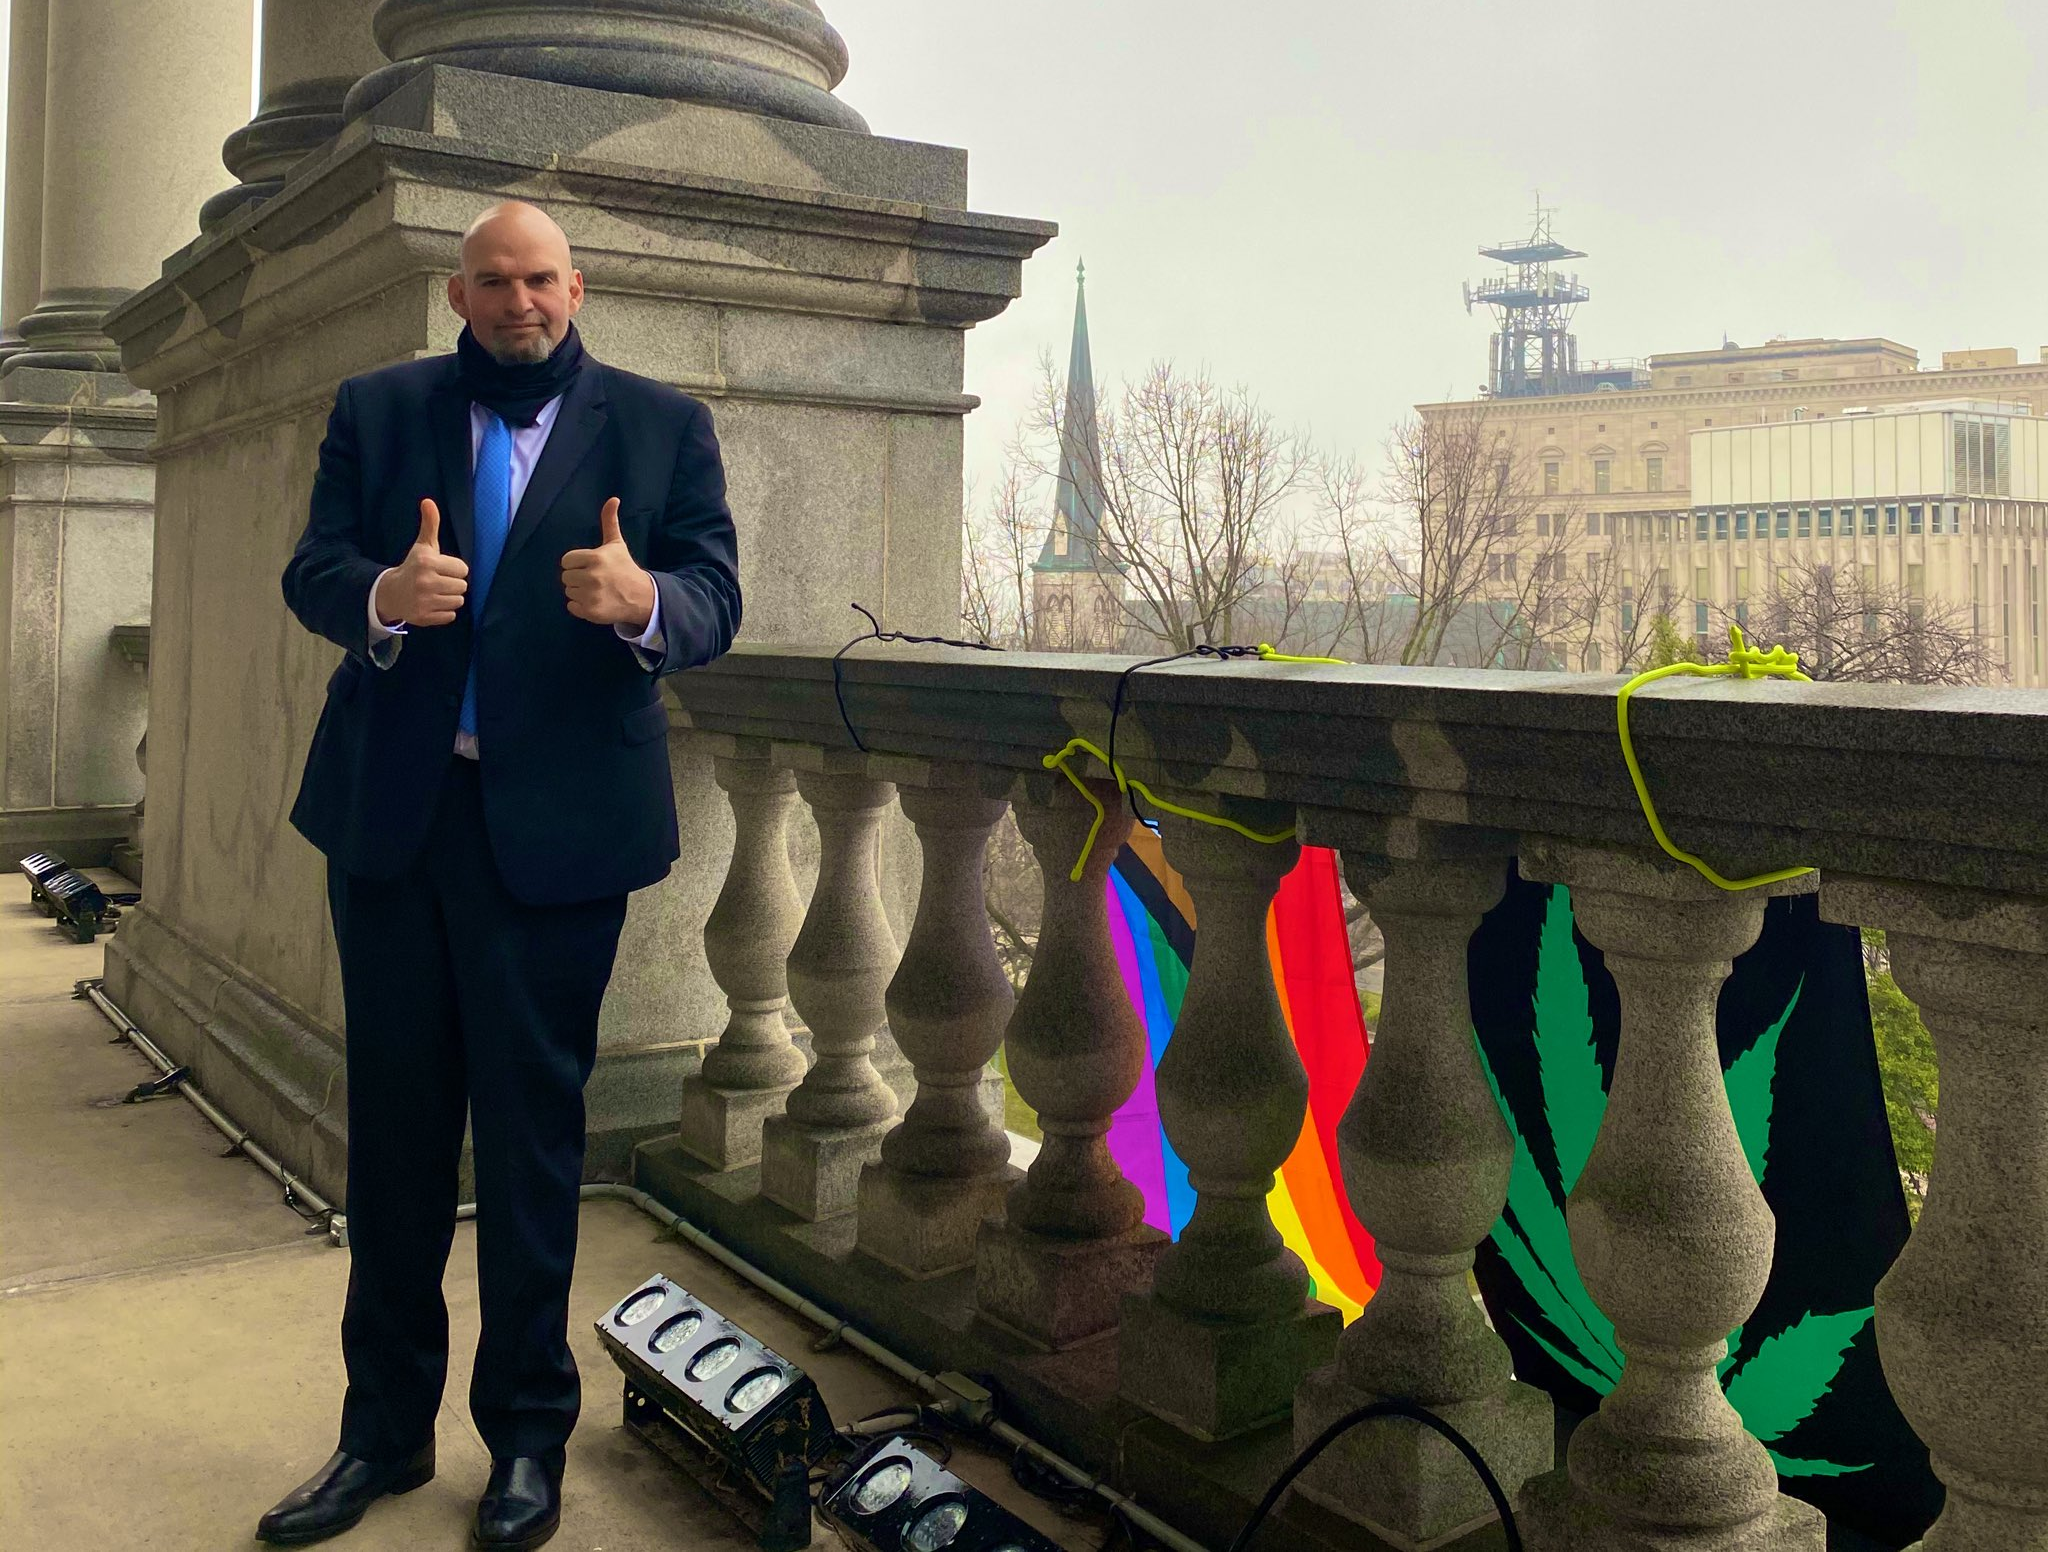 John Fetterman stands in front of pride and weed flags.